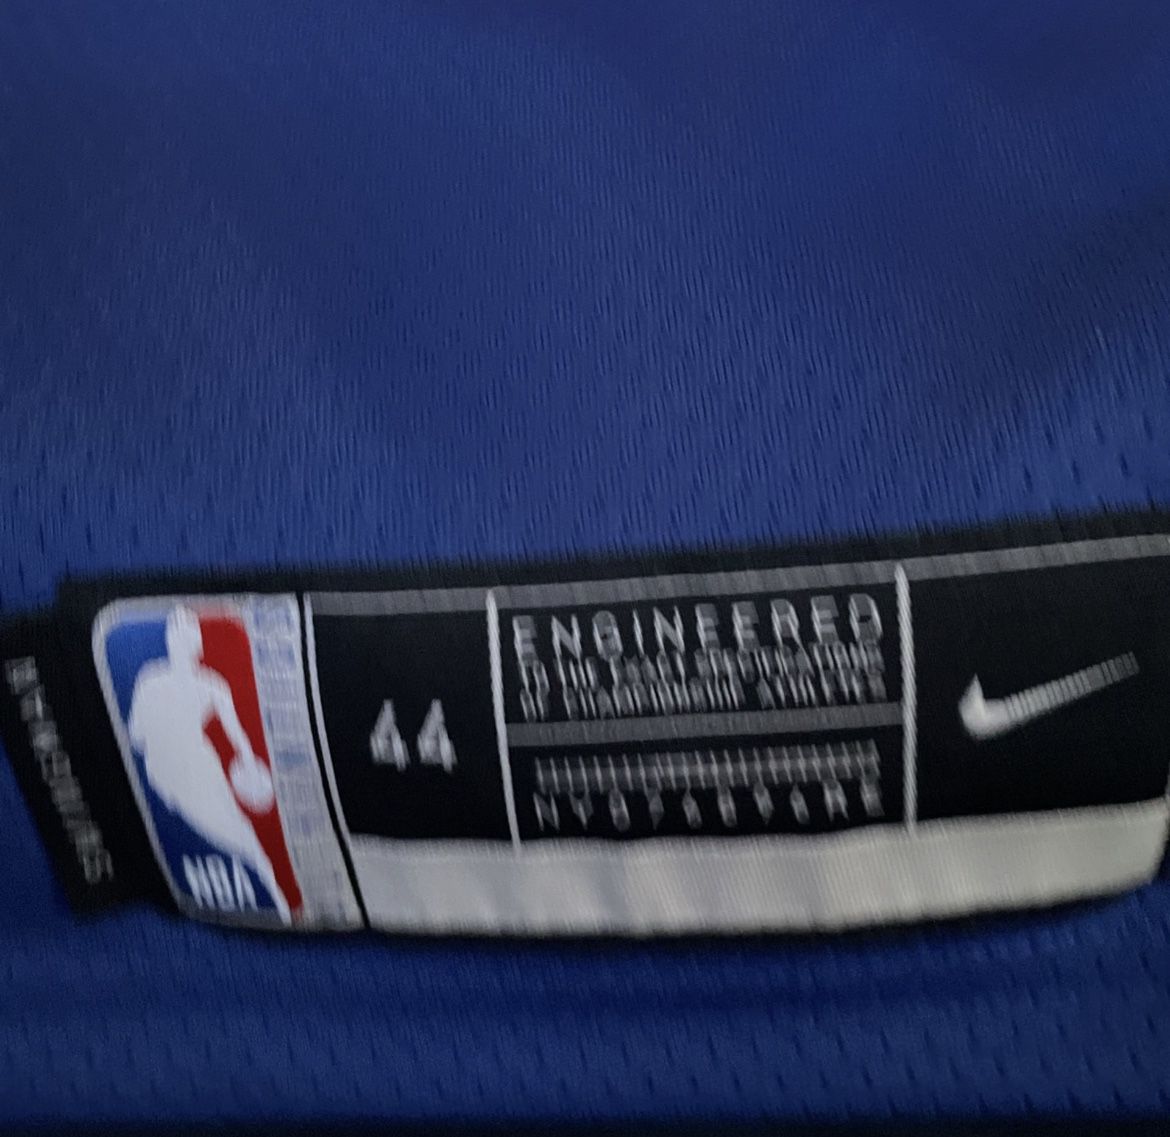 New York Knicks Julius Randle Jersey - $65 for Sale in Jamaica, NY - OfferUp